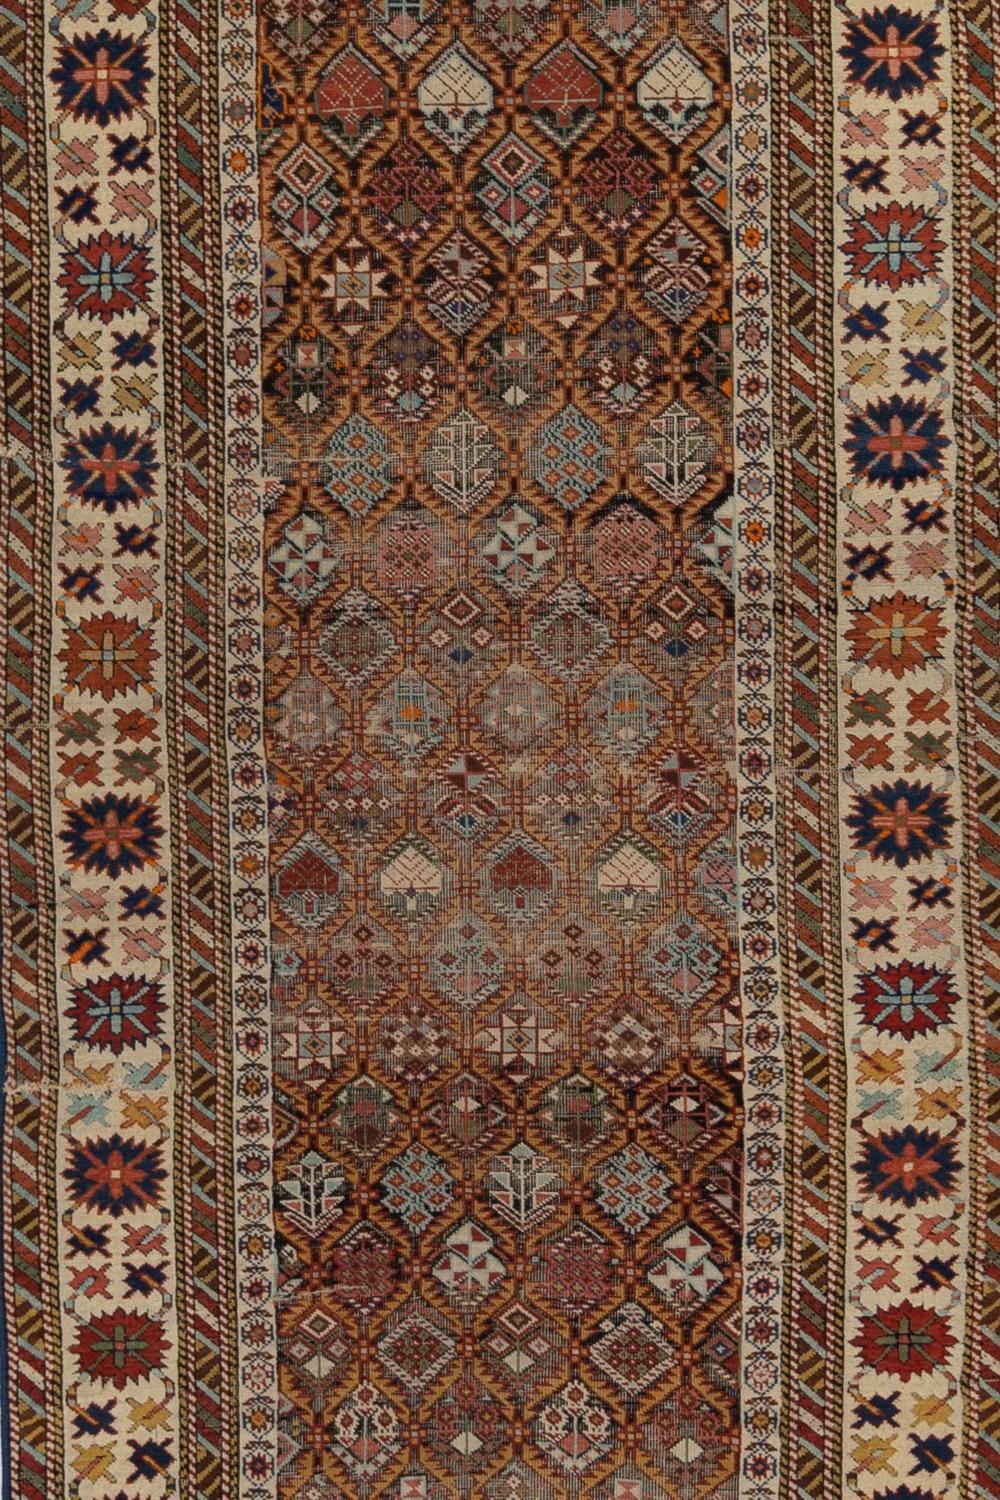 Circa 100 years
Pile: Low
Exquisitely detailed antique Shirvan with signature.
Wear Notes: 4

Wear Notes:
Vintage and antique rugs are by nature, pre-loved and may show evidence of their past. There are varying degrees of wear to vintage rugs; some